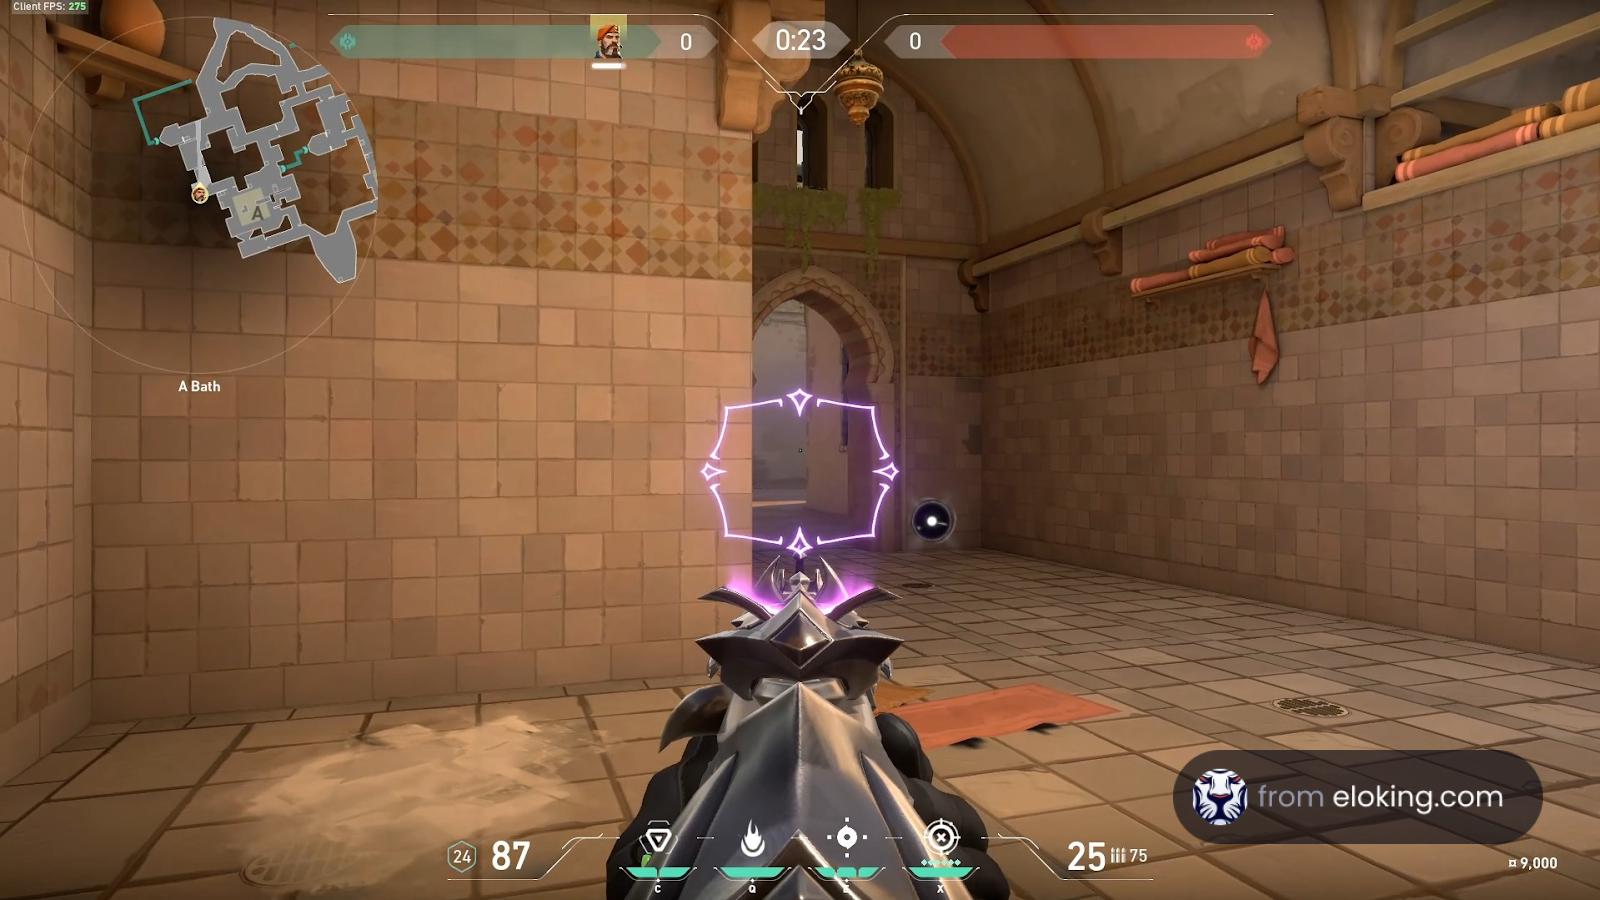 First person view in a shooter game with HUD elements displayed